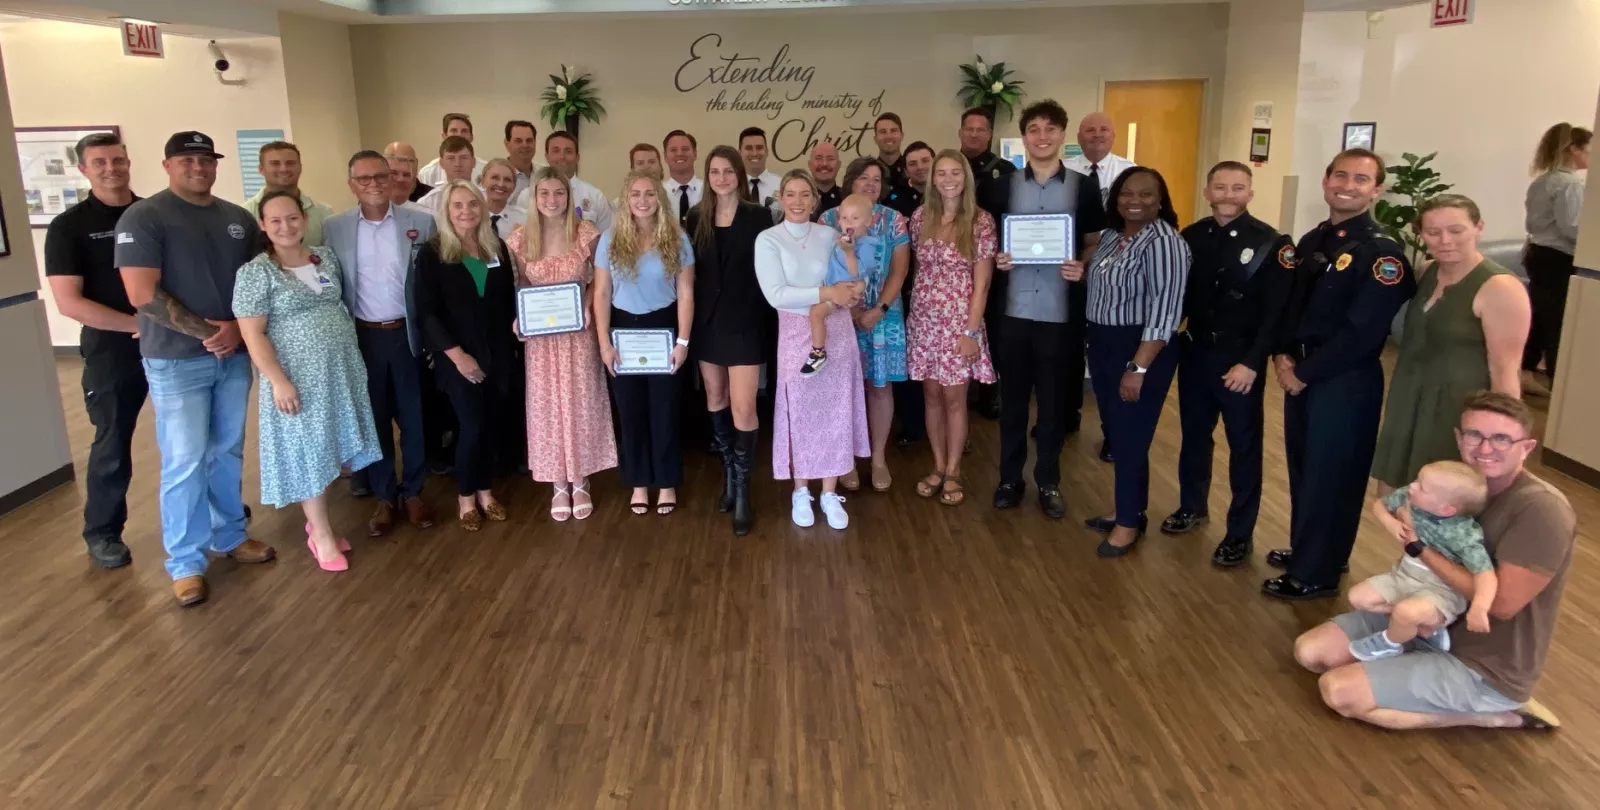 Three high school seniors received the Ethan Wilson Memorial Scholarship from the medical staff at AdventHealth New Smyrna Beach.  